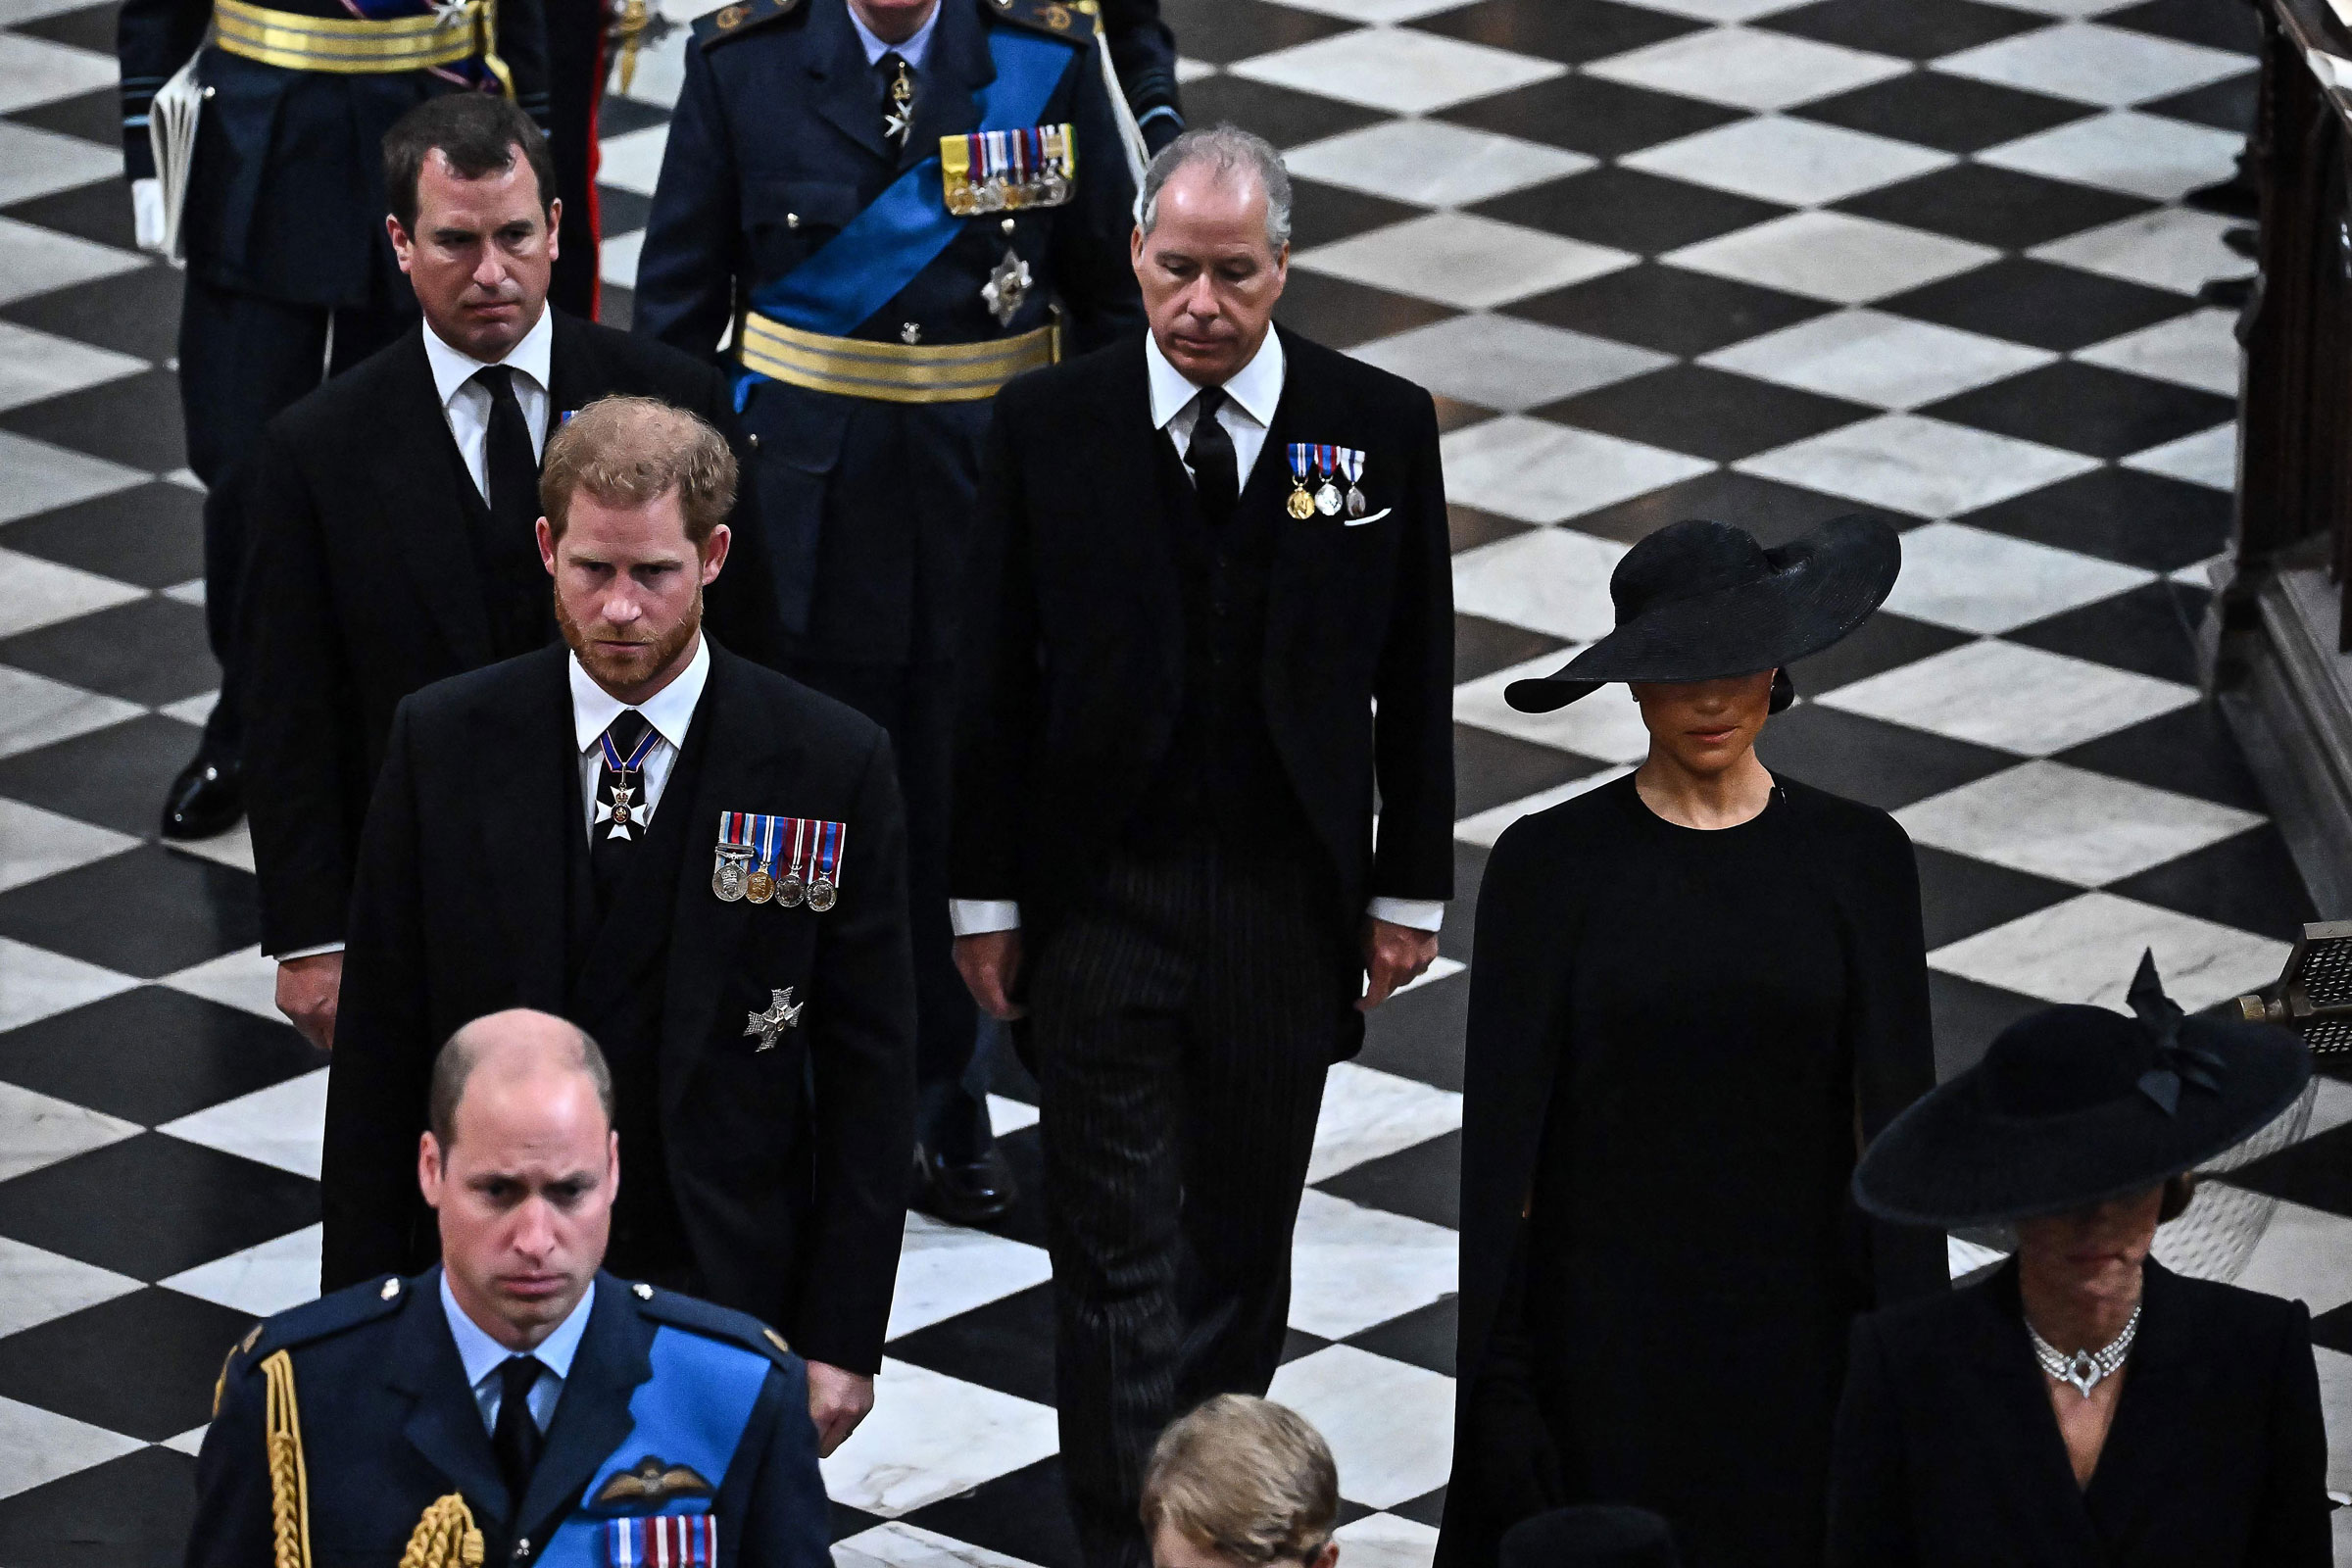 Peter Phillips (L), Britain's Prince Harry, Duke of Sussex (centre left), Britain's Prince William, Prince of Wales (bottom left), Britain's Earl of Snowdon (C) and Britain's Meghan, Duchess of Sussex (R) leave the Abbey at the State Funeral Service for Britain's Queen Elizabeth II, at Westminster Abbey in London on September 19, 2022. (Ben Stansall—Pool/AFP/Getty Images)